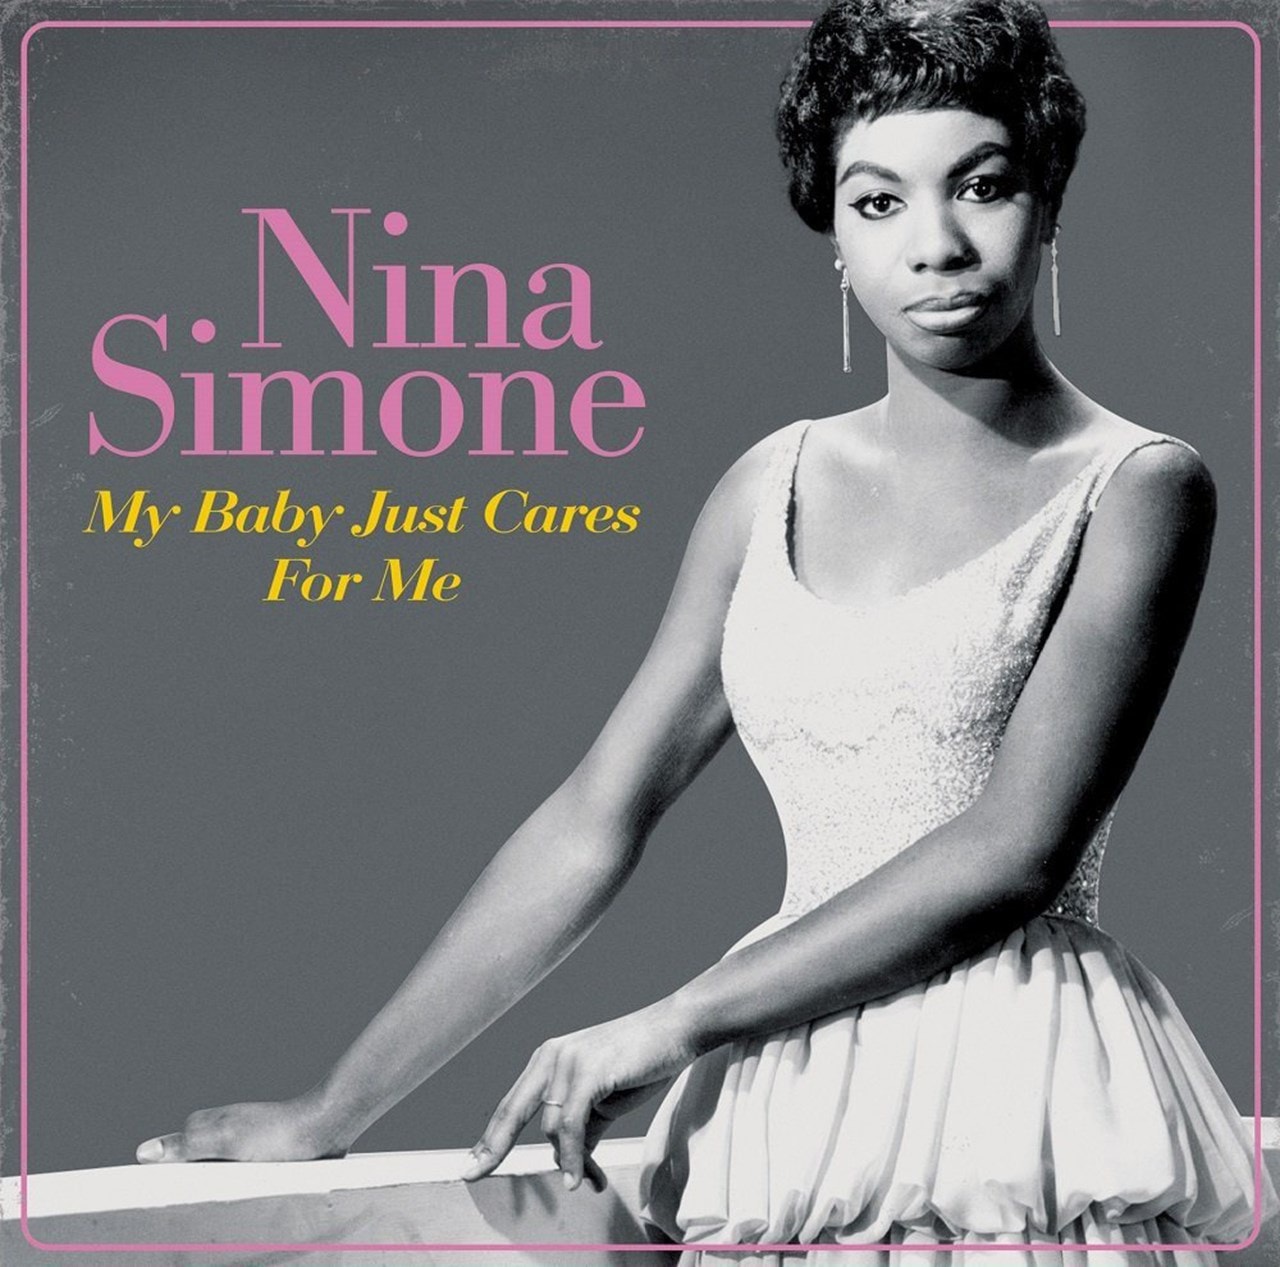 Nina Simone - MY BABY JUST CARES FOR ME